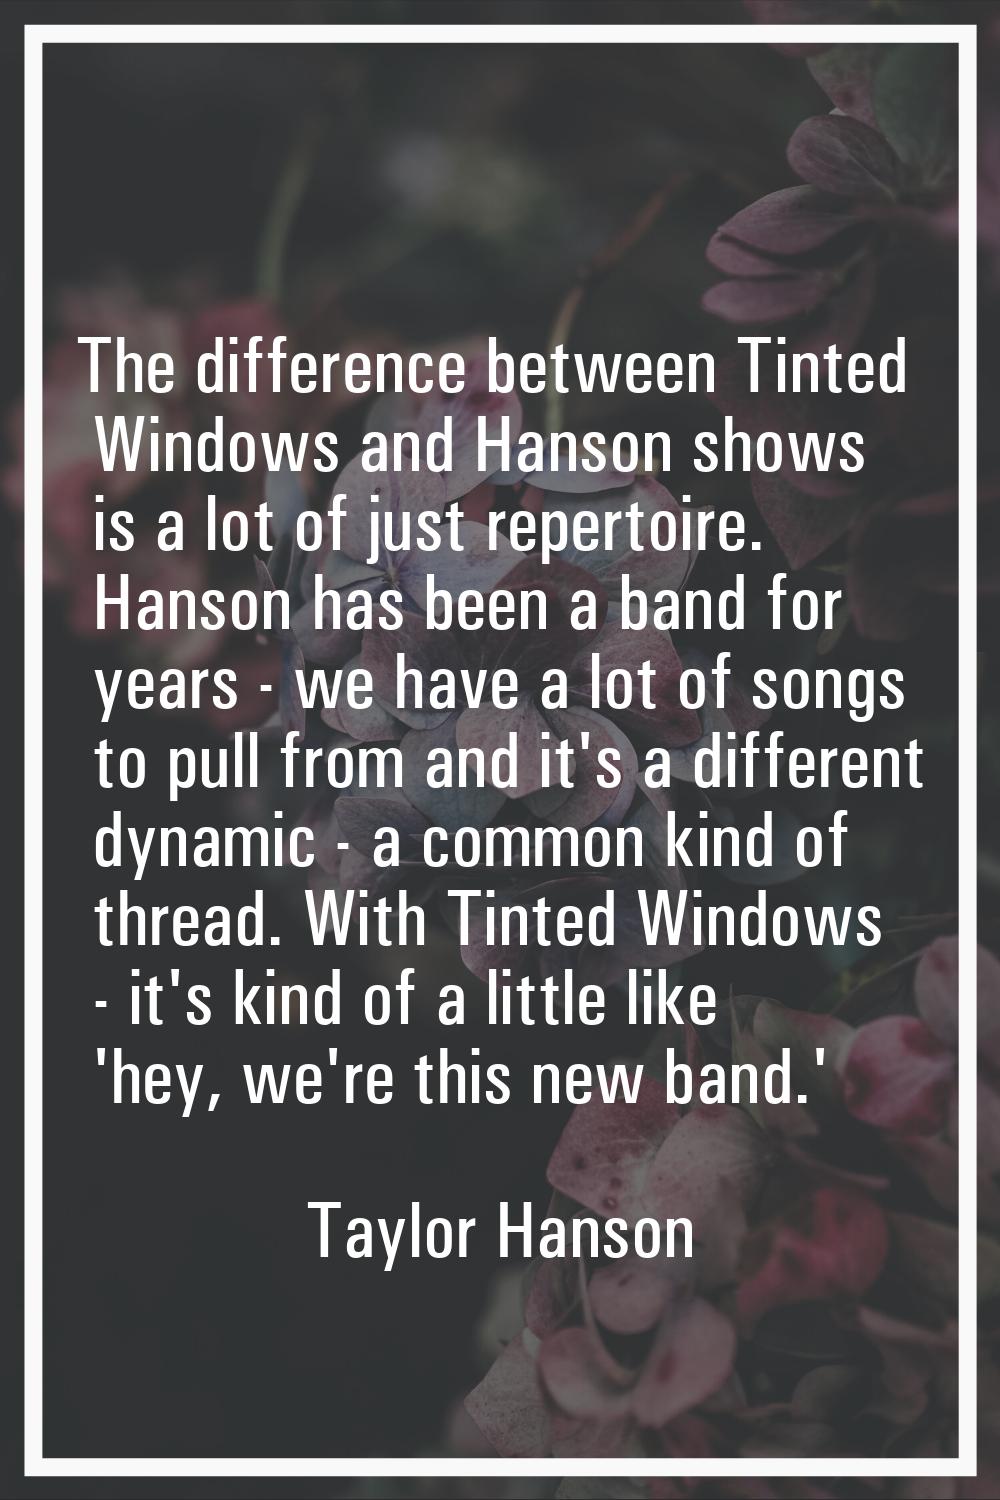 The difference between Tinted Windows and Hanson shows is a lot of just repertoire. Hanson has been